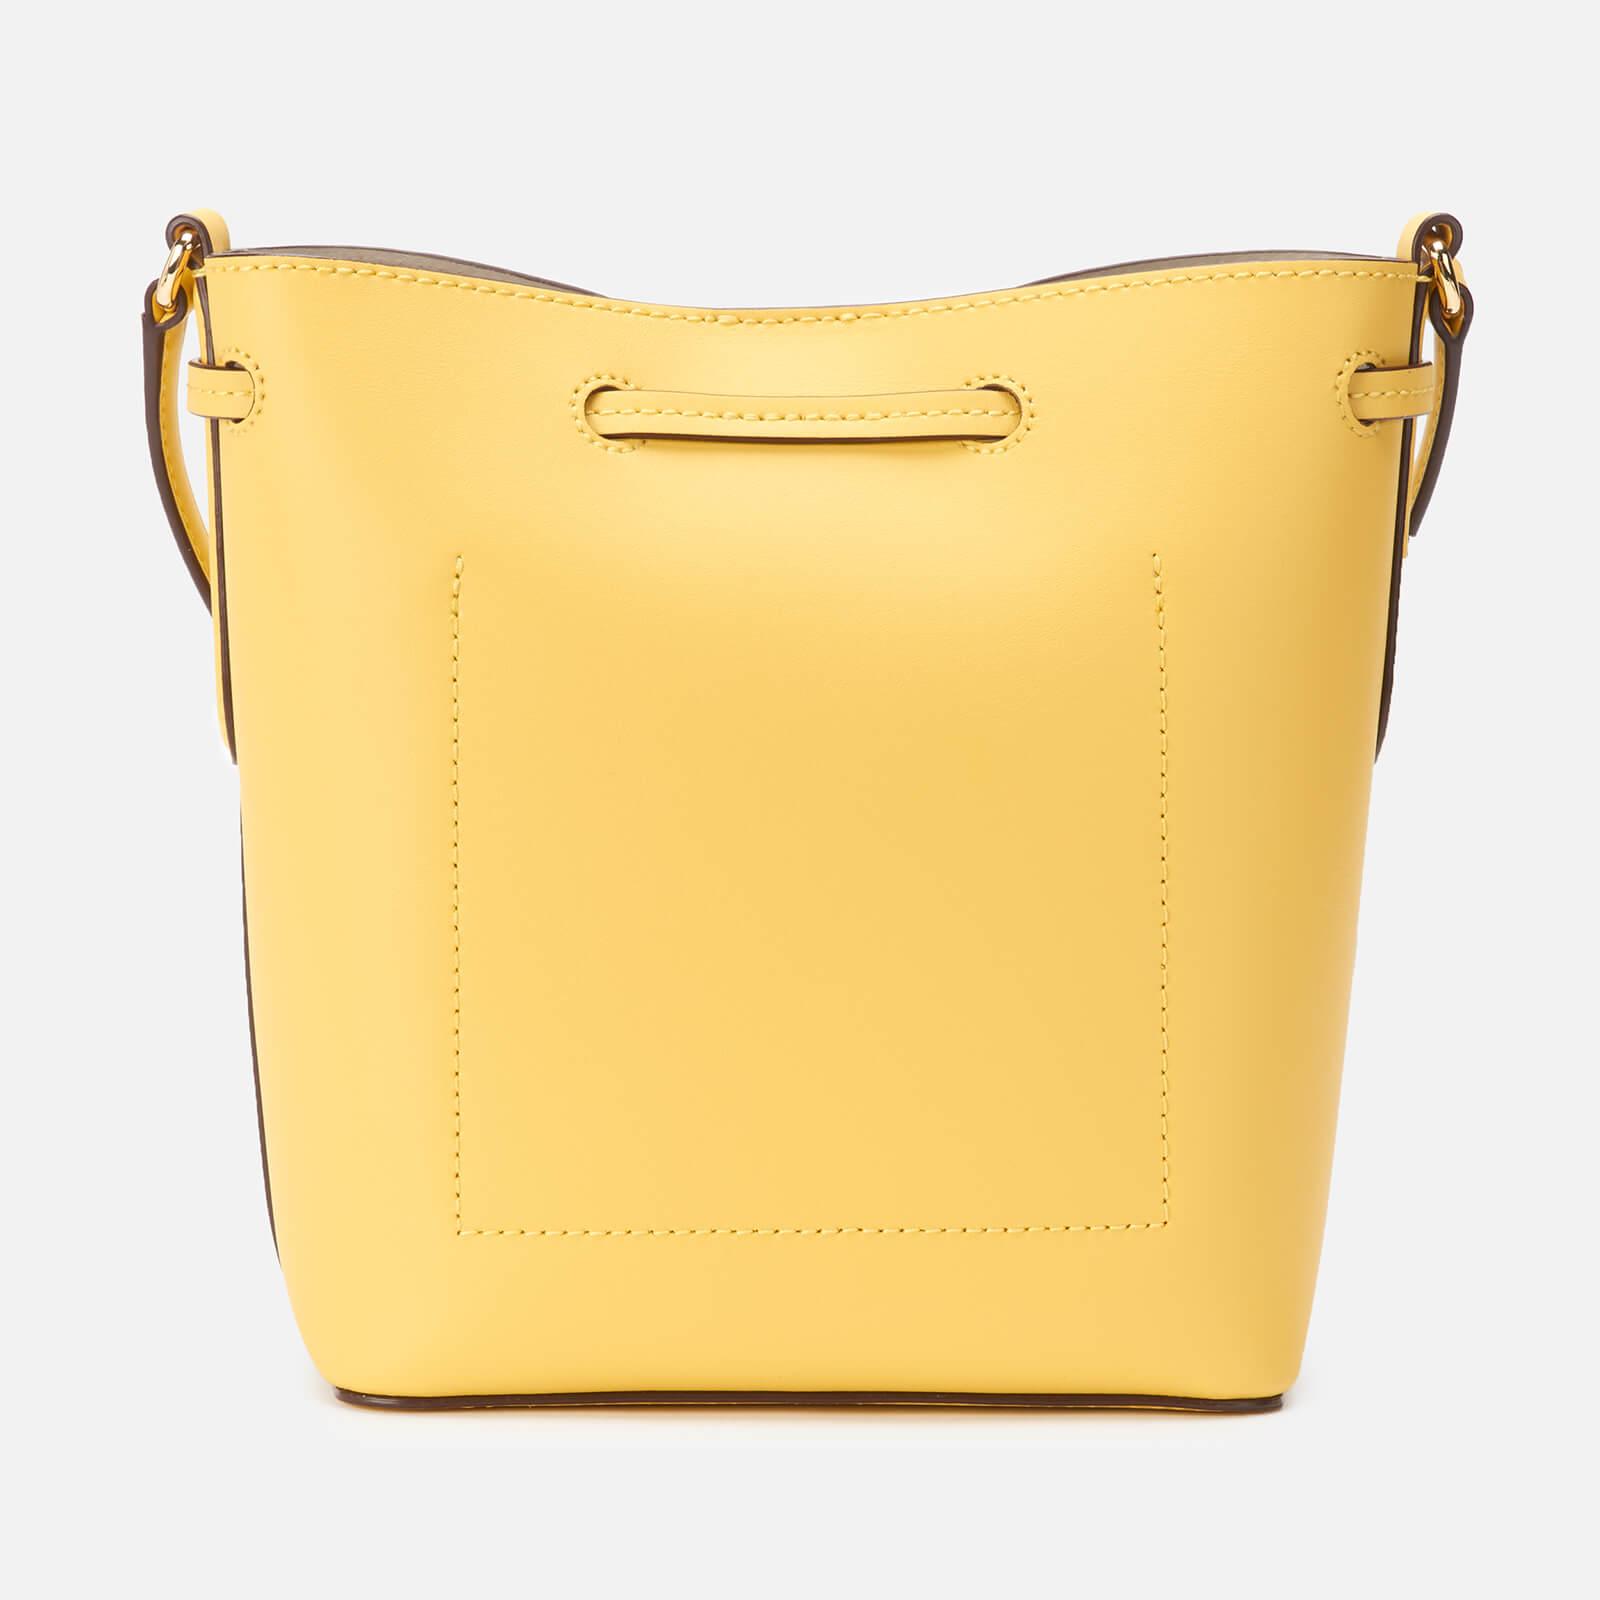 Lauren by Ralph Lauren Super Smooth Leather Debby Drawstring Bag in Yellow  | Lyst